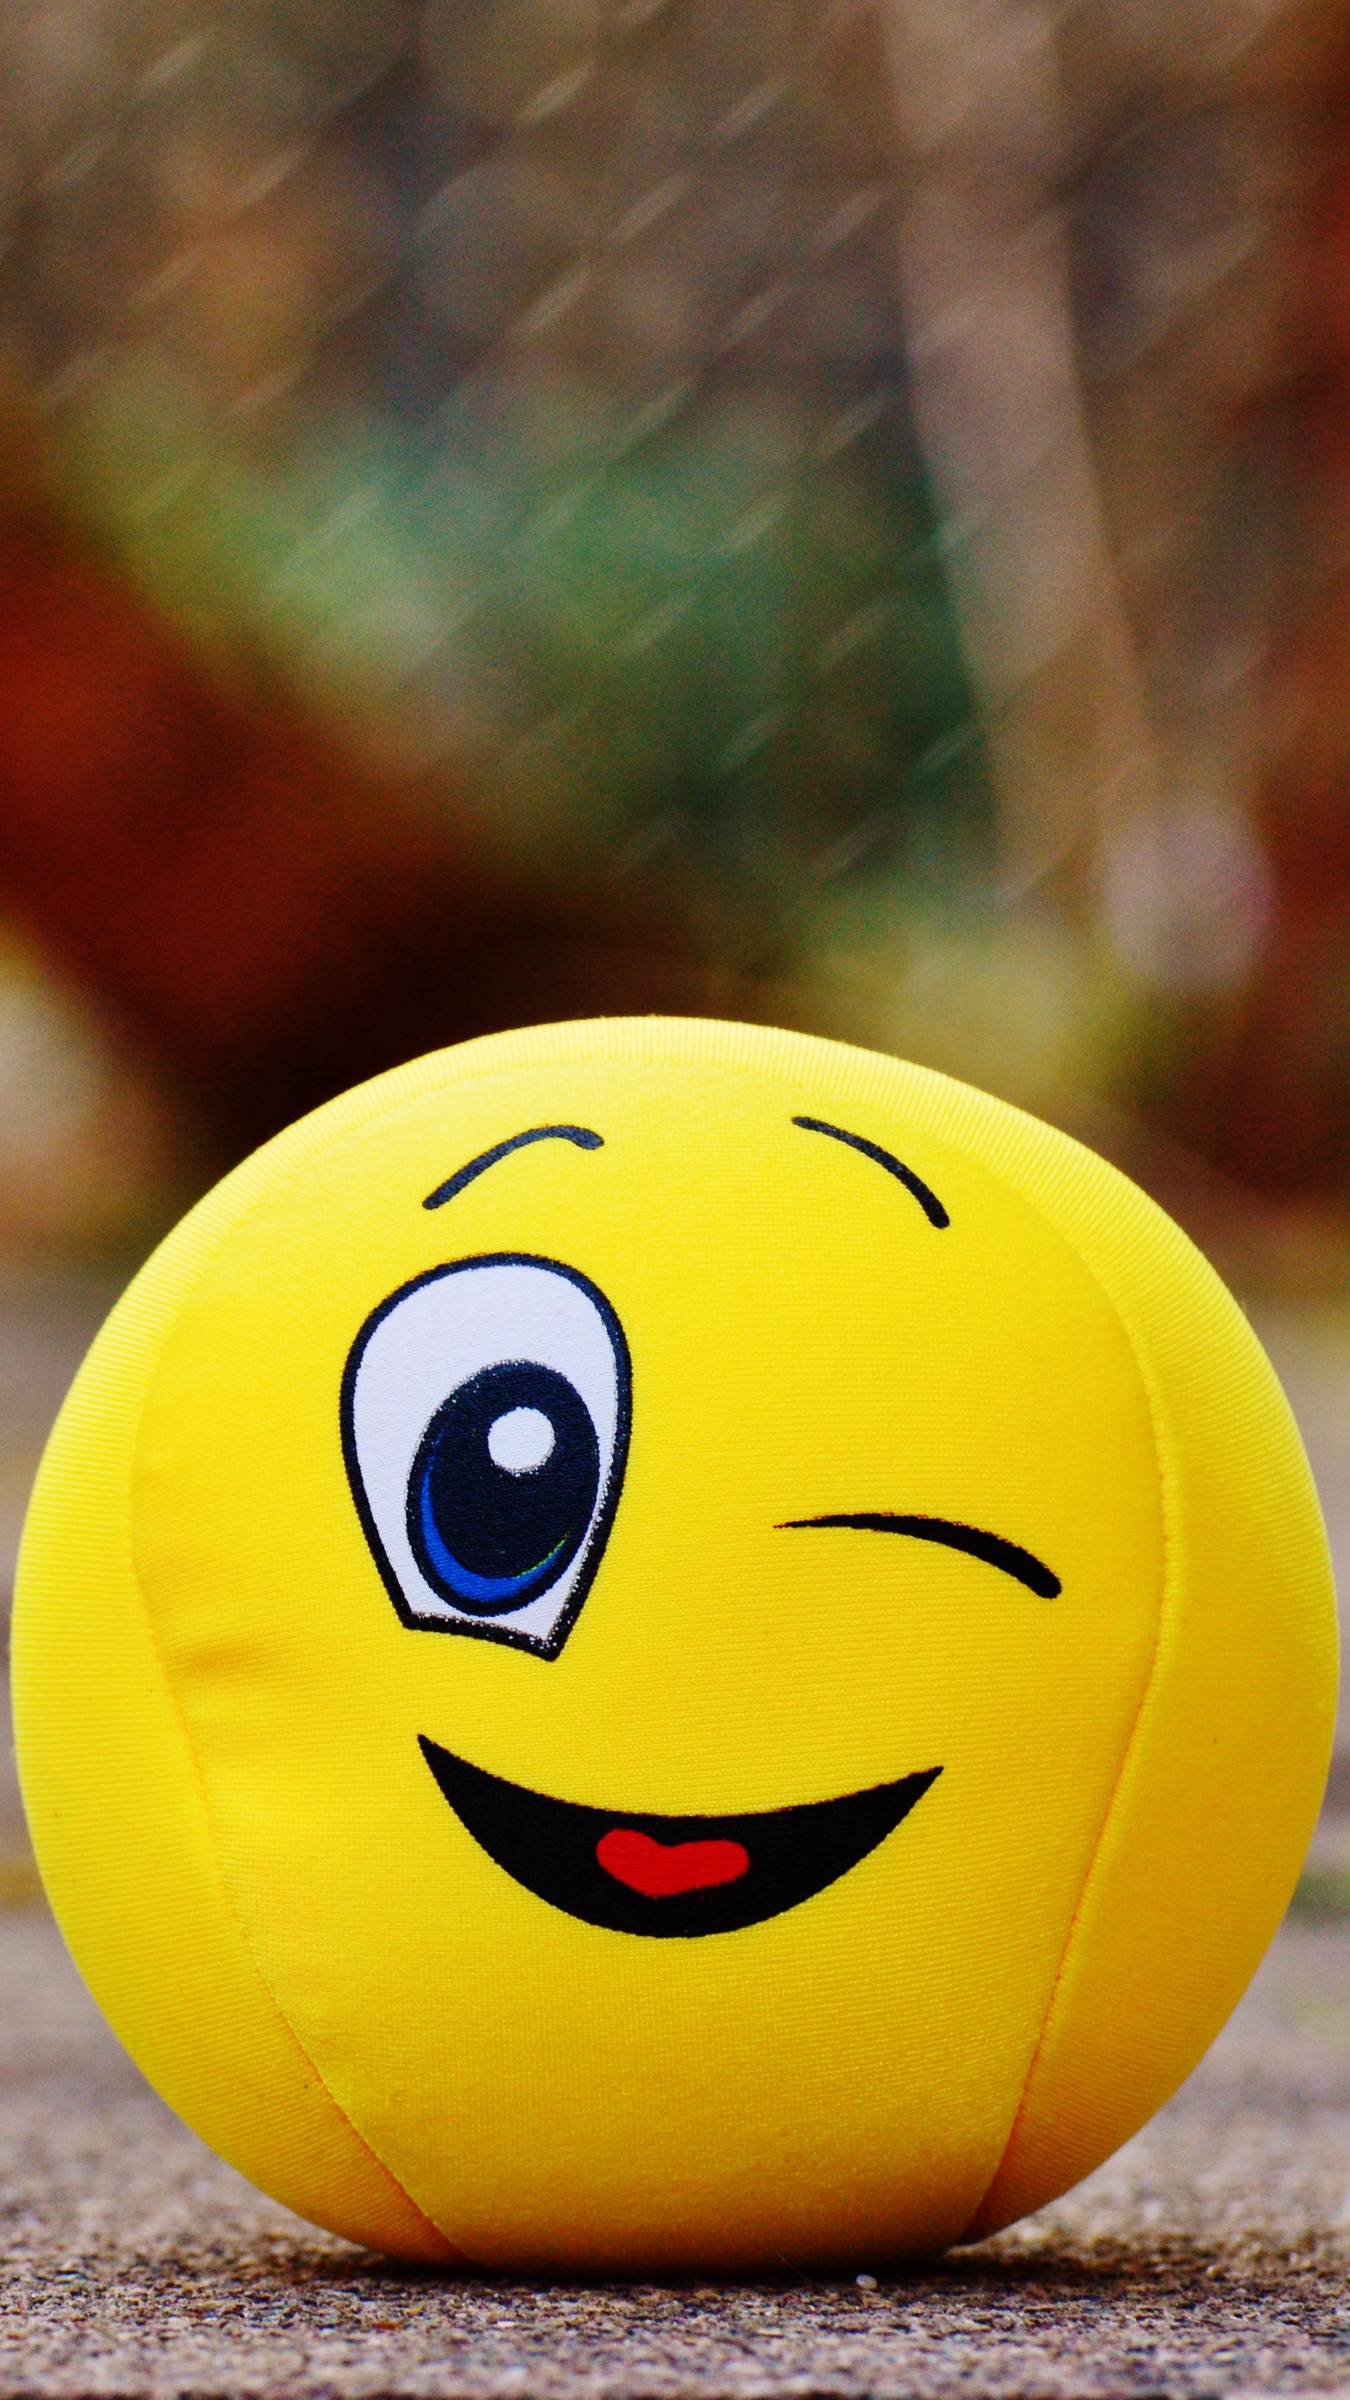 Download wallpaper 1350x2400 ball smile happy toy iphone 87